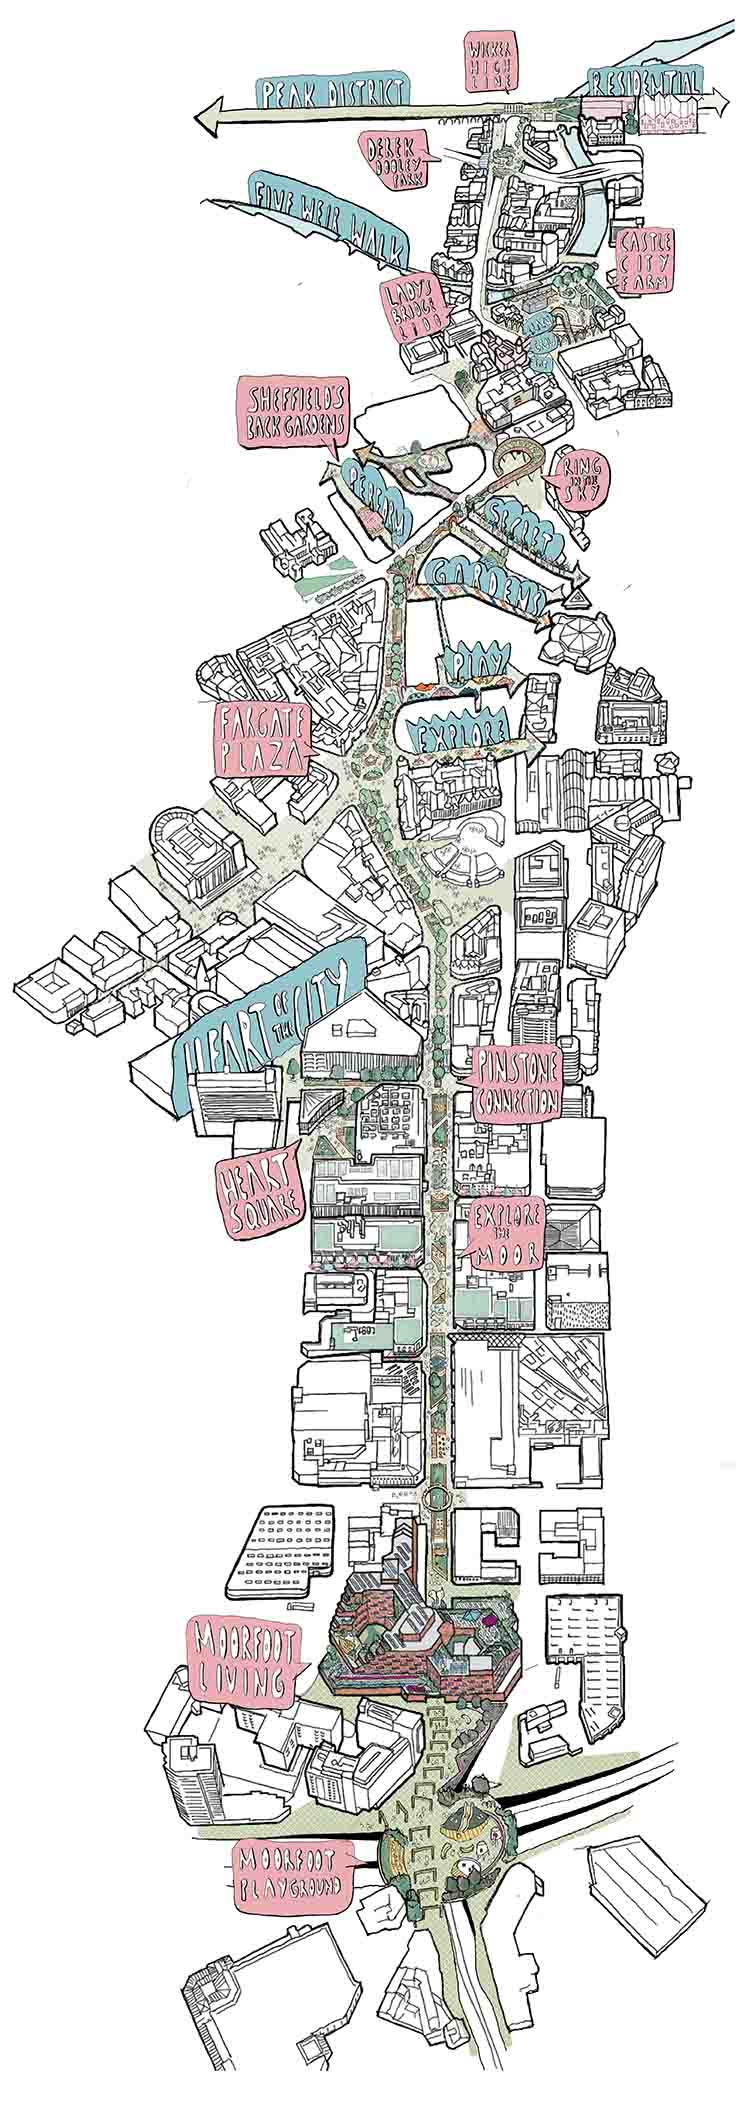 Our Manifesto Map for the historic Sheffield High Street. 